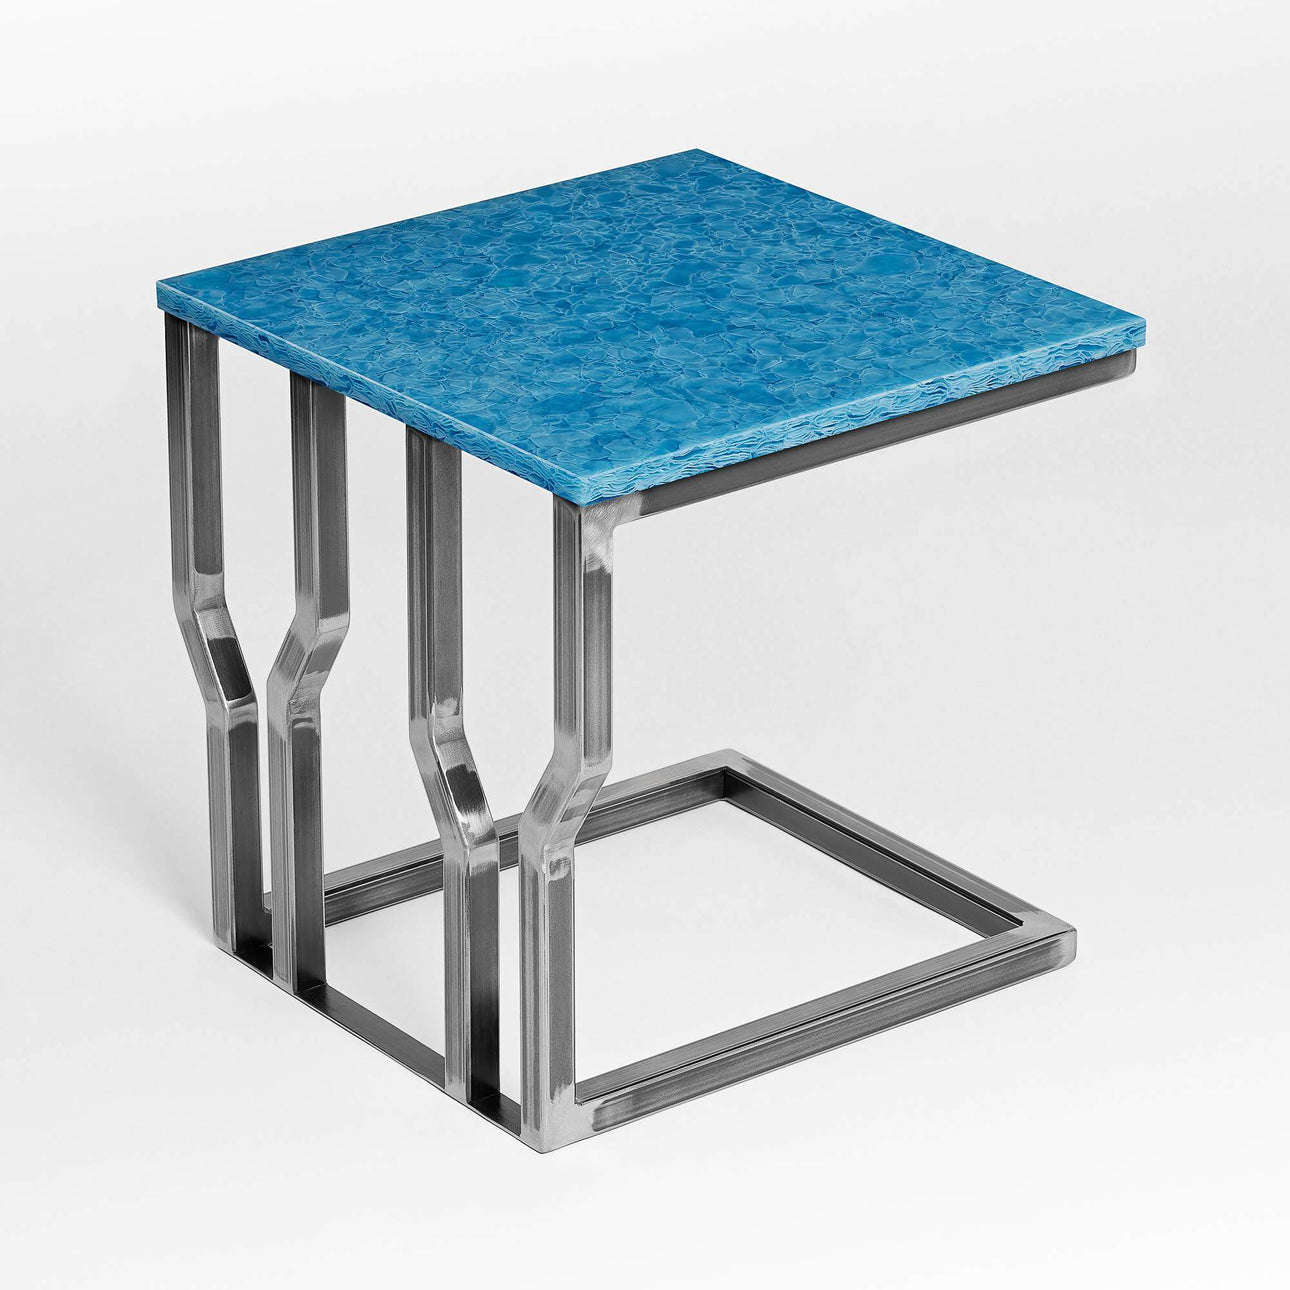 Silicon Valley glass ceramic side table